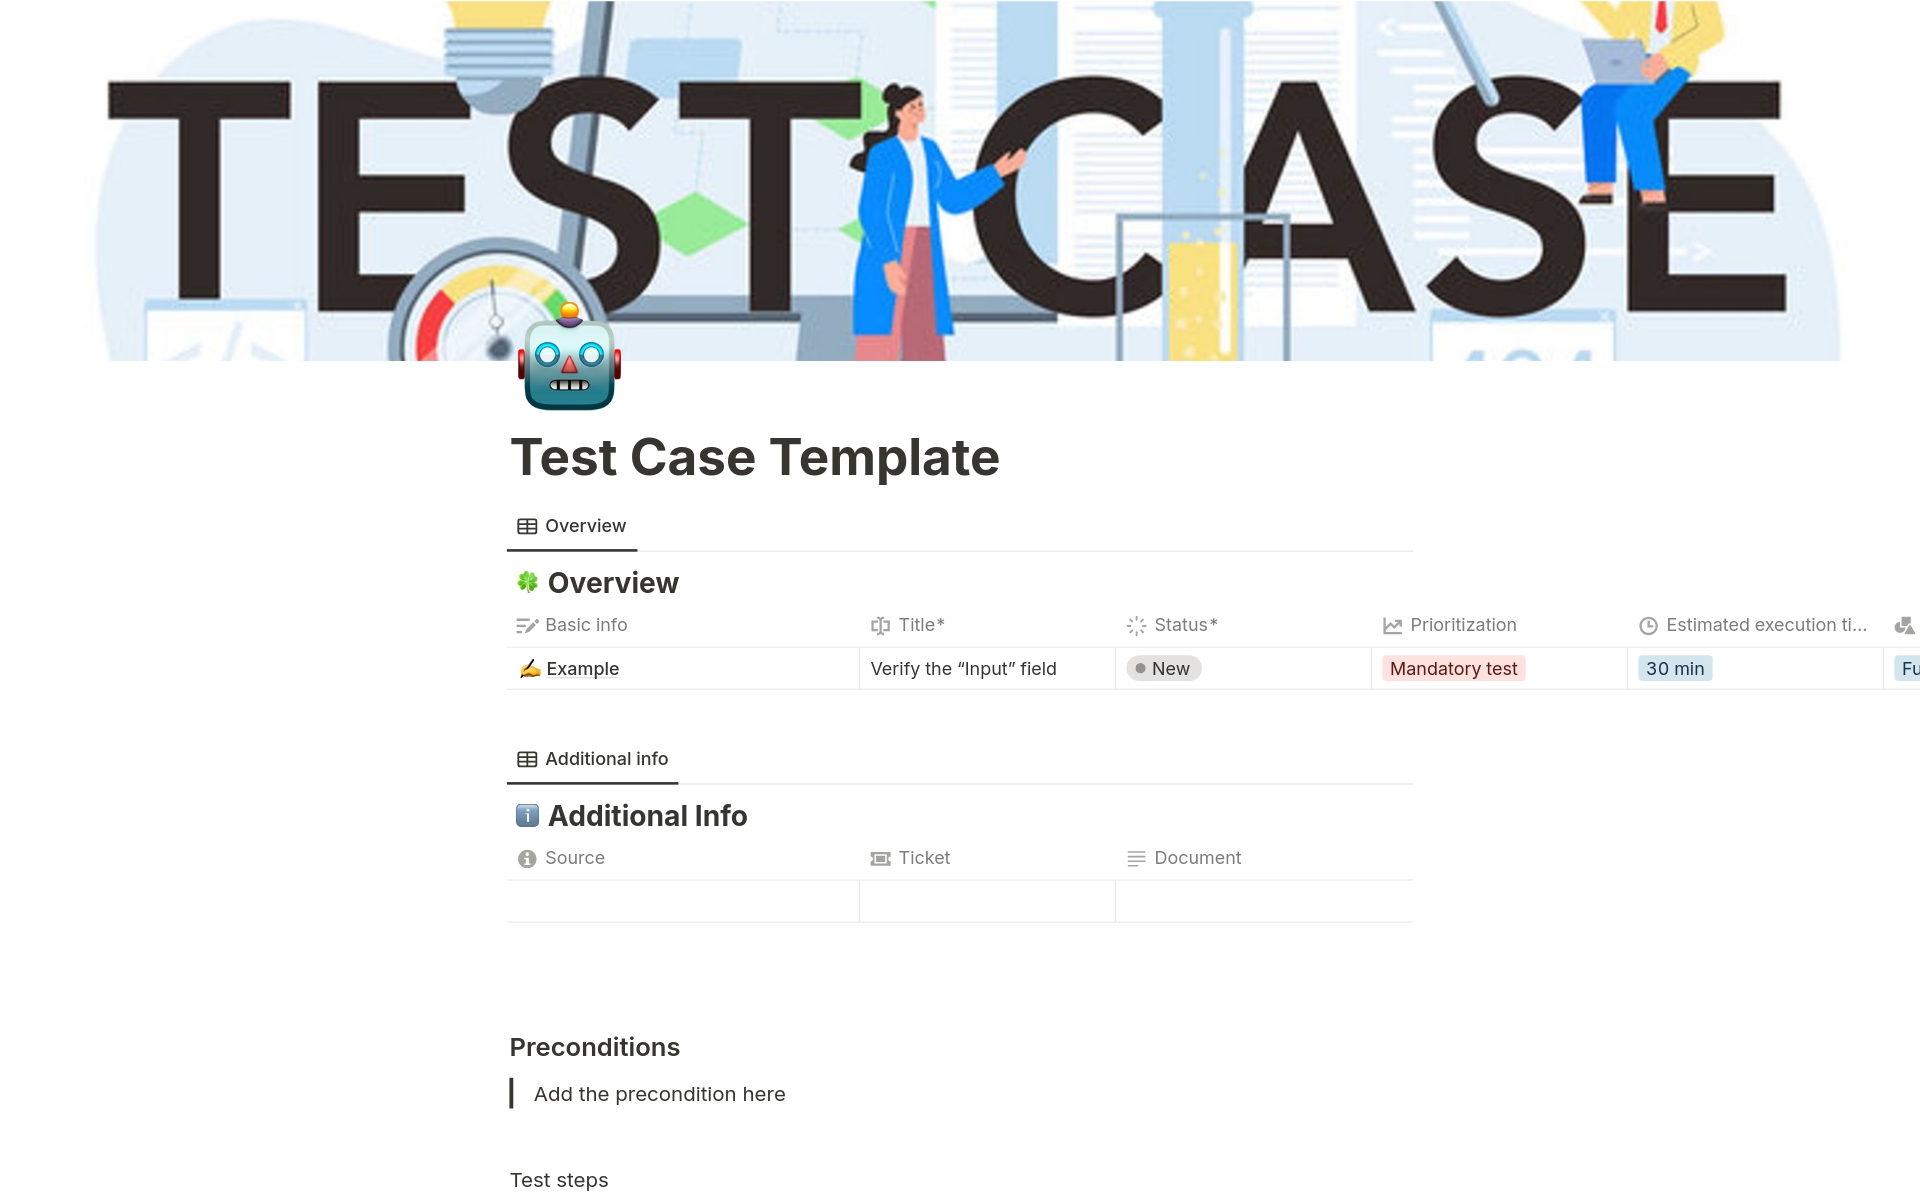 Boost Software Testing Efficiency with Our Customizable Test Case Notion Template - Streamline Collaboration, Organization, and Coverage for Improved Results!